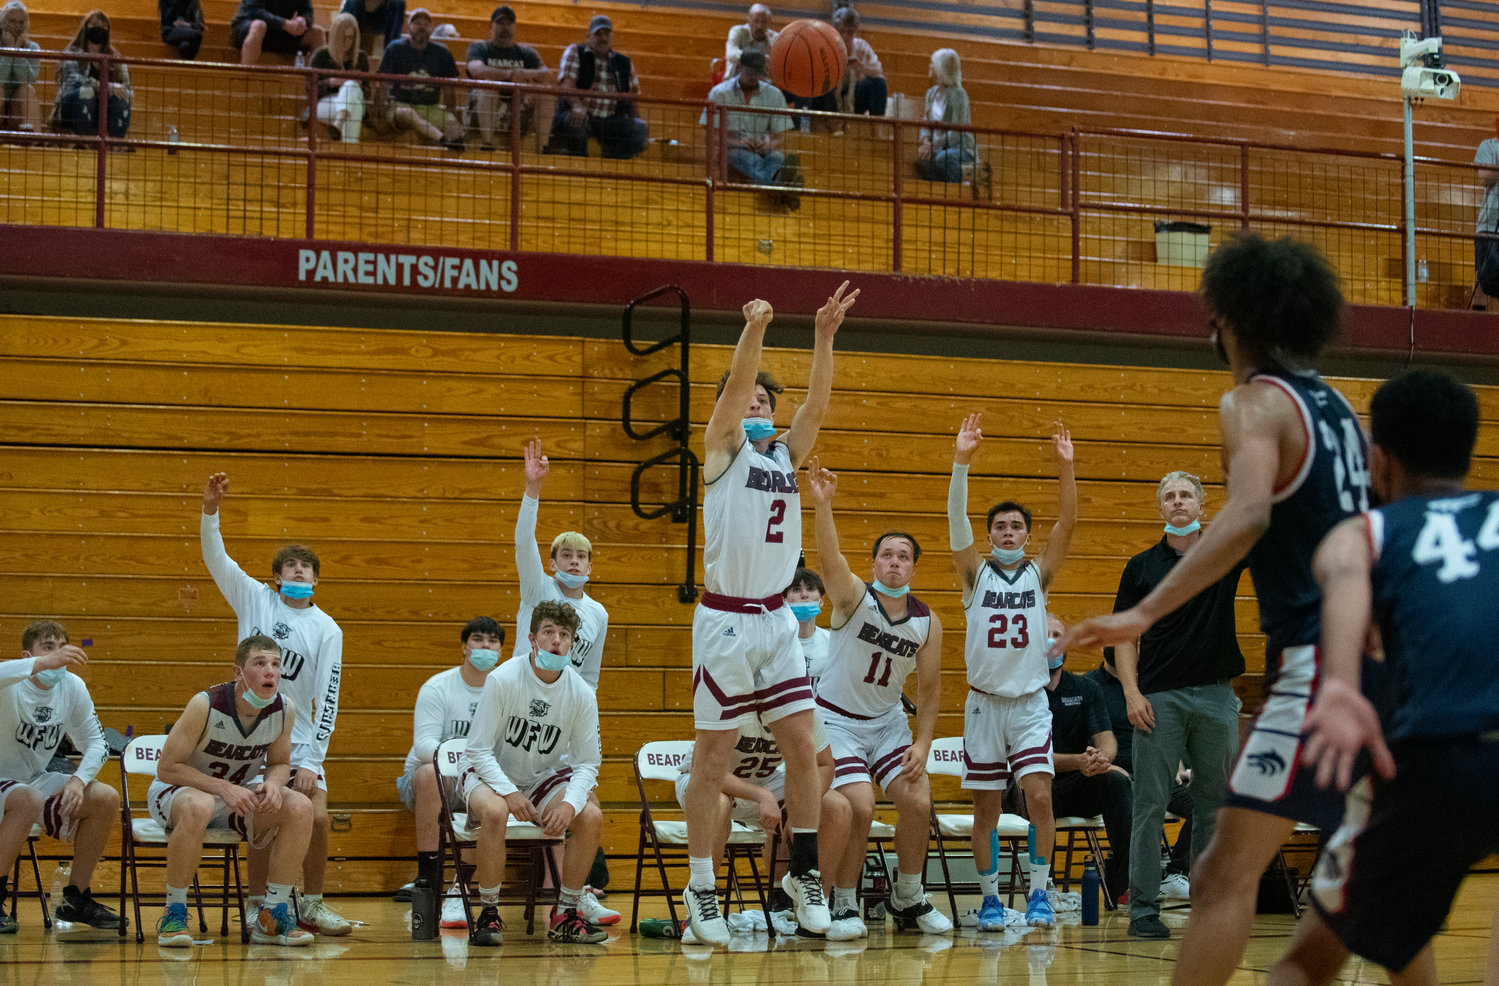 W.F. West senior Max Taylor (2) shoots a 3-pointer while the Bearcats' bench throws up the "three" sign.